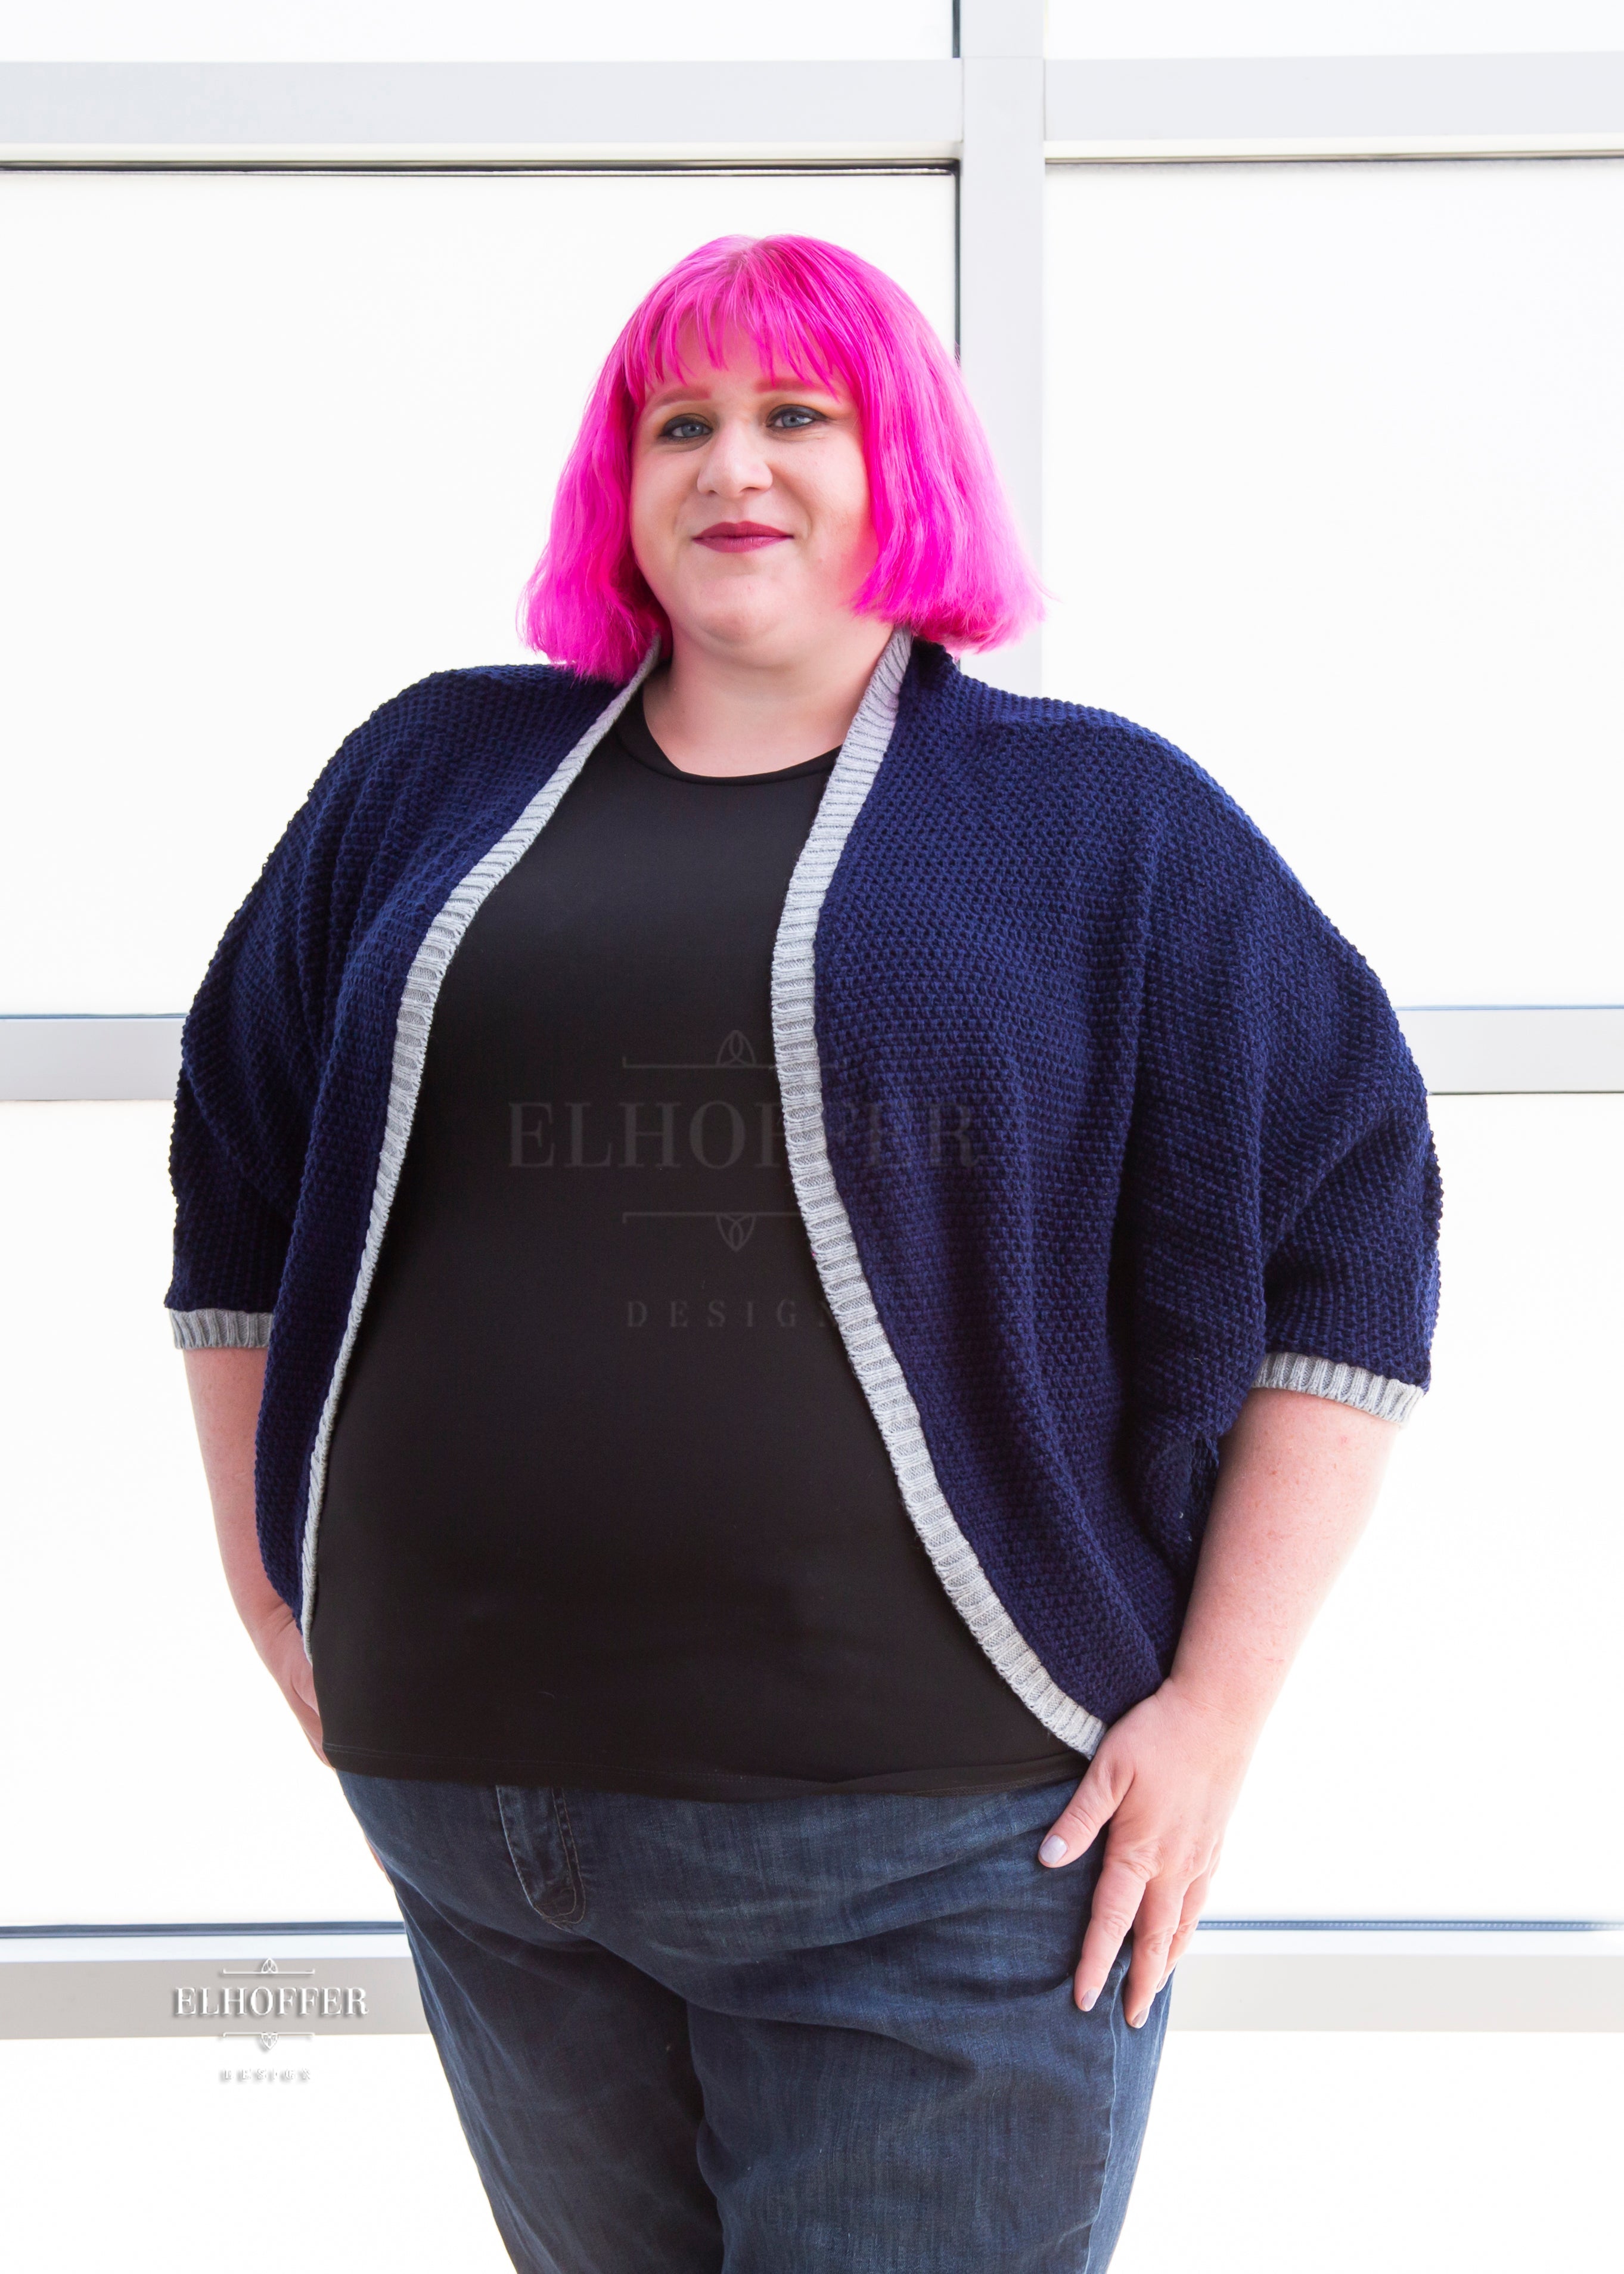 Logan, a fair skinned 3xl model with short bright pink hair with bangs, is wearing a dark blue loose knit dolman with light grey ribbing around edges and cuffs. The dolman features 3/4 length sleeves and a magical script design (circle with T crossing through the circle) on the back.